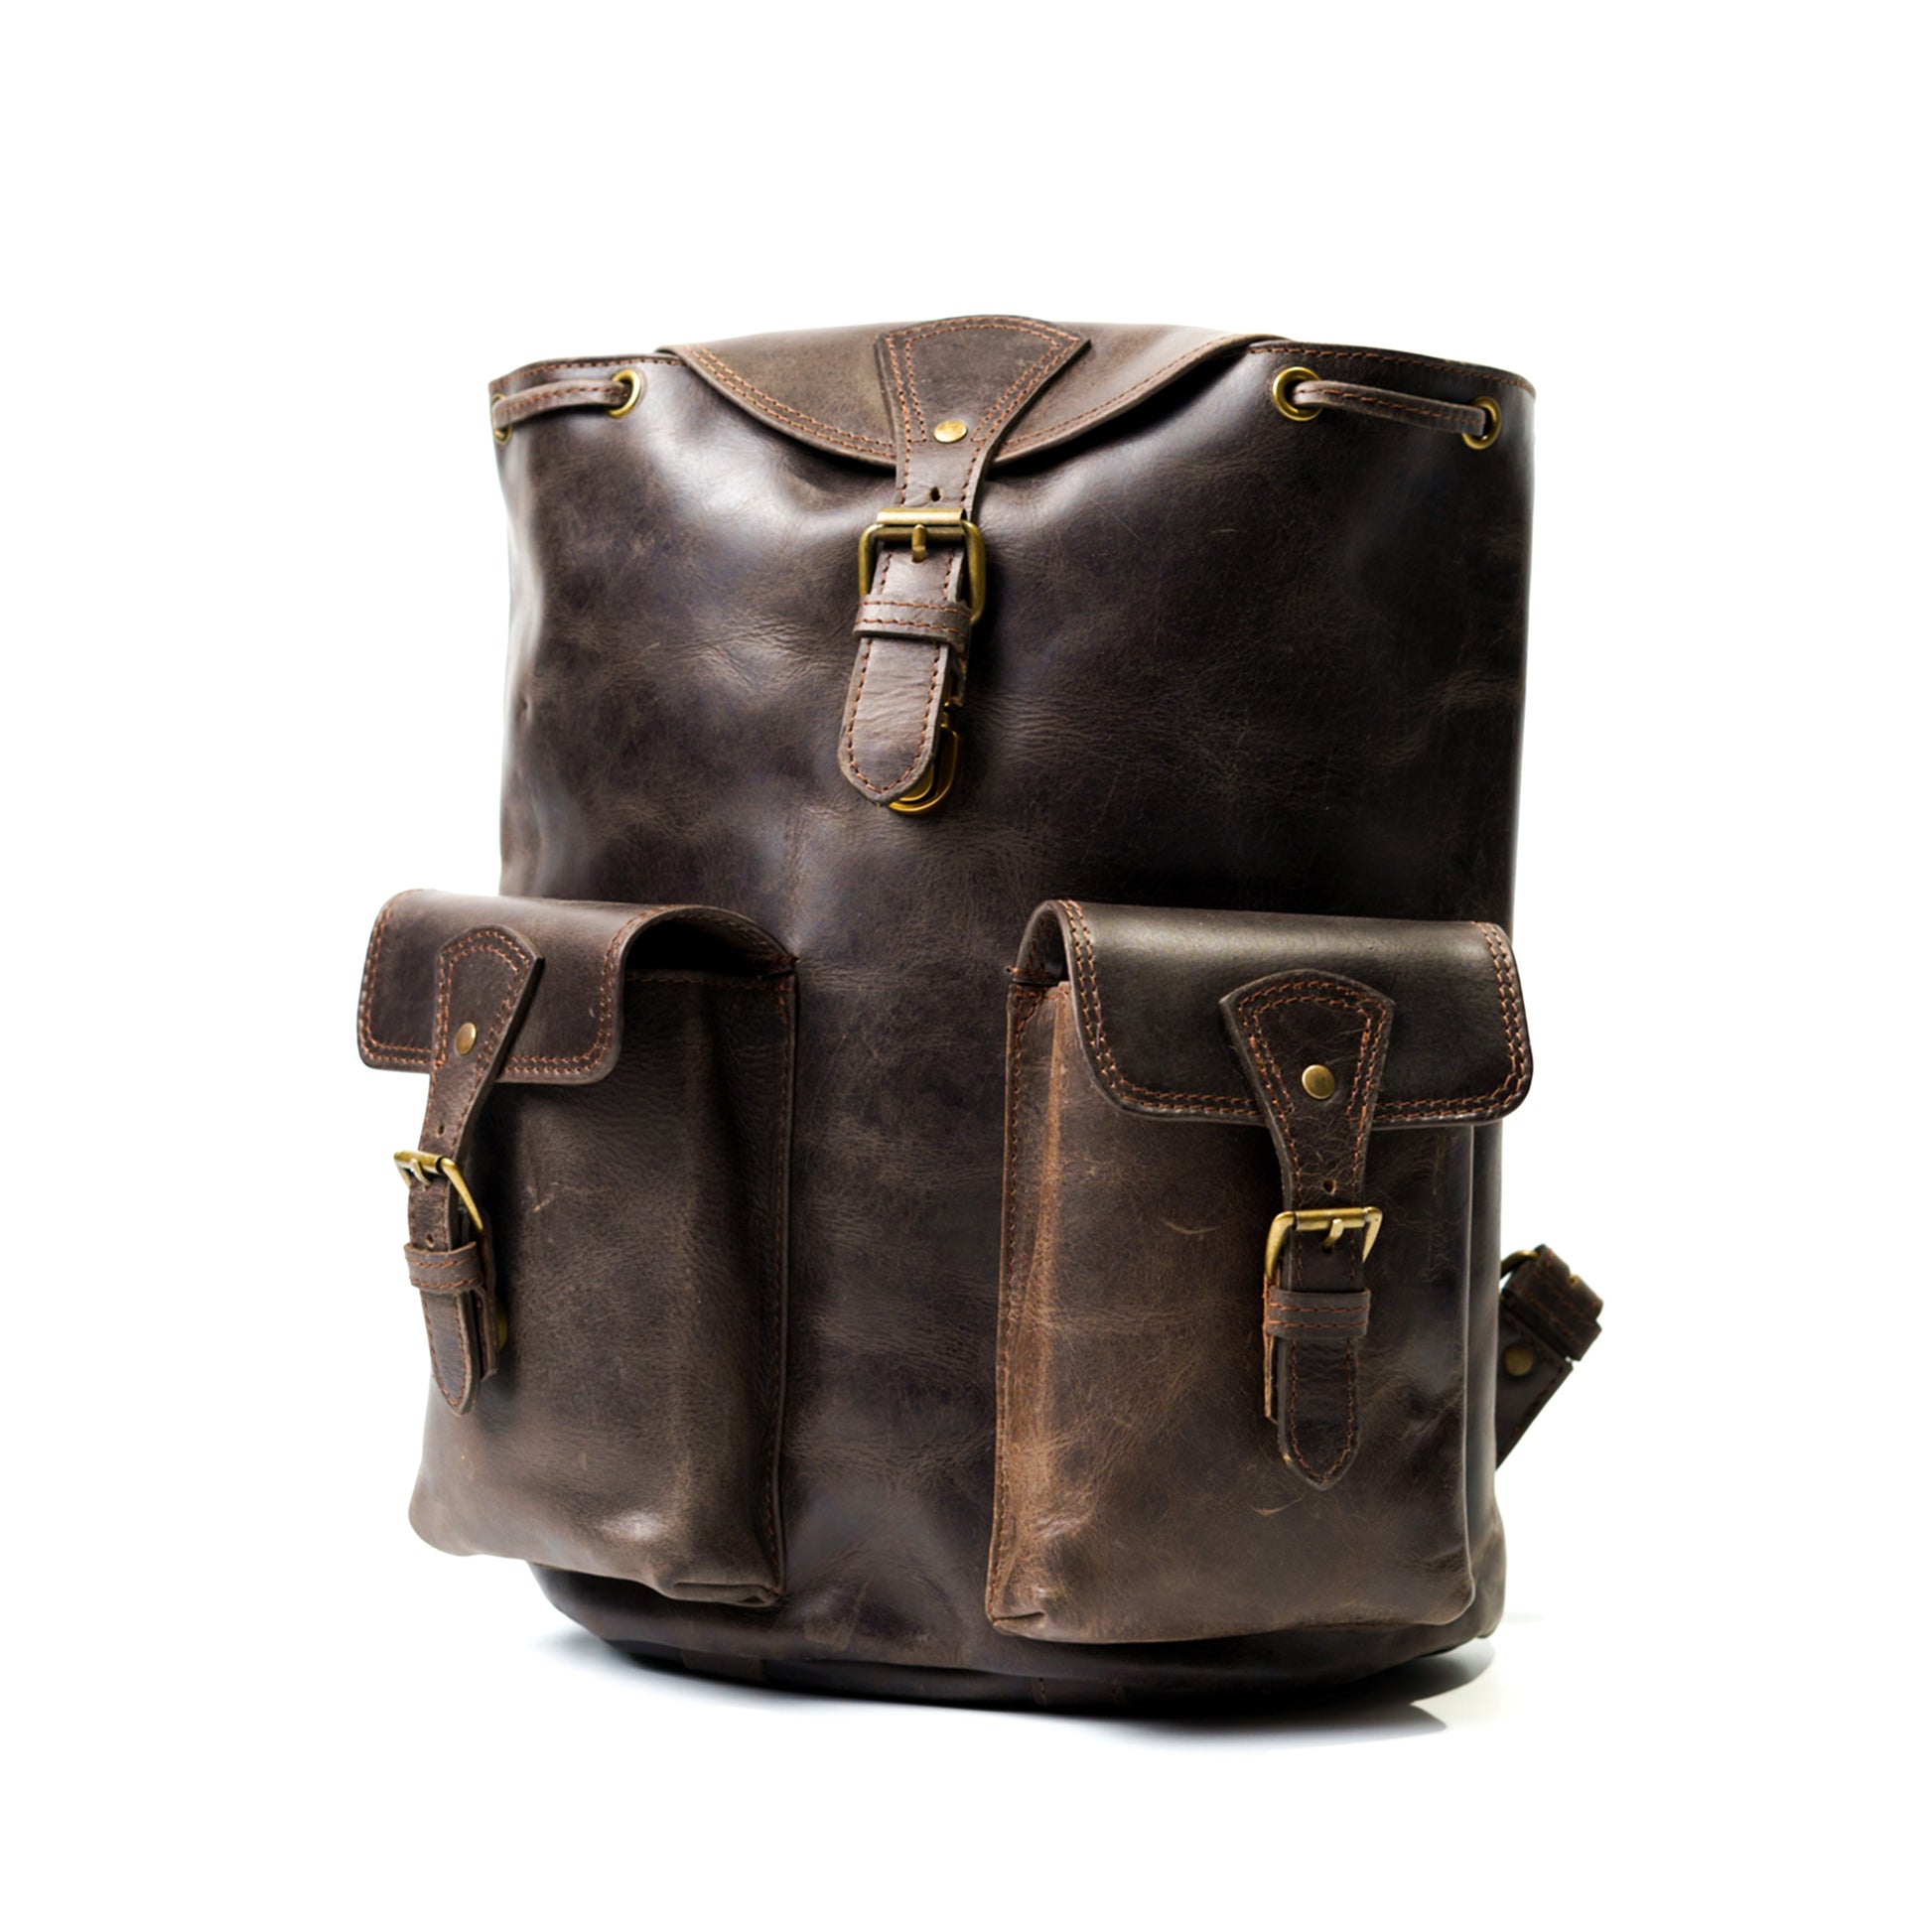 Deep Brown Leather Backpack Leather Rucksack Backpack Women 